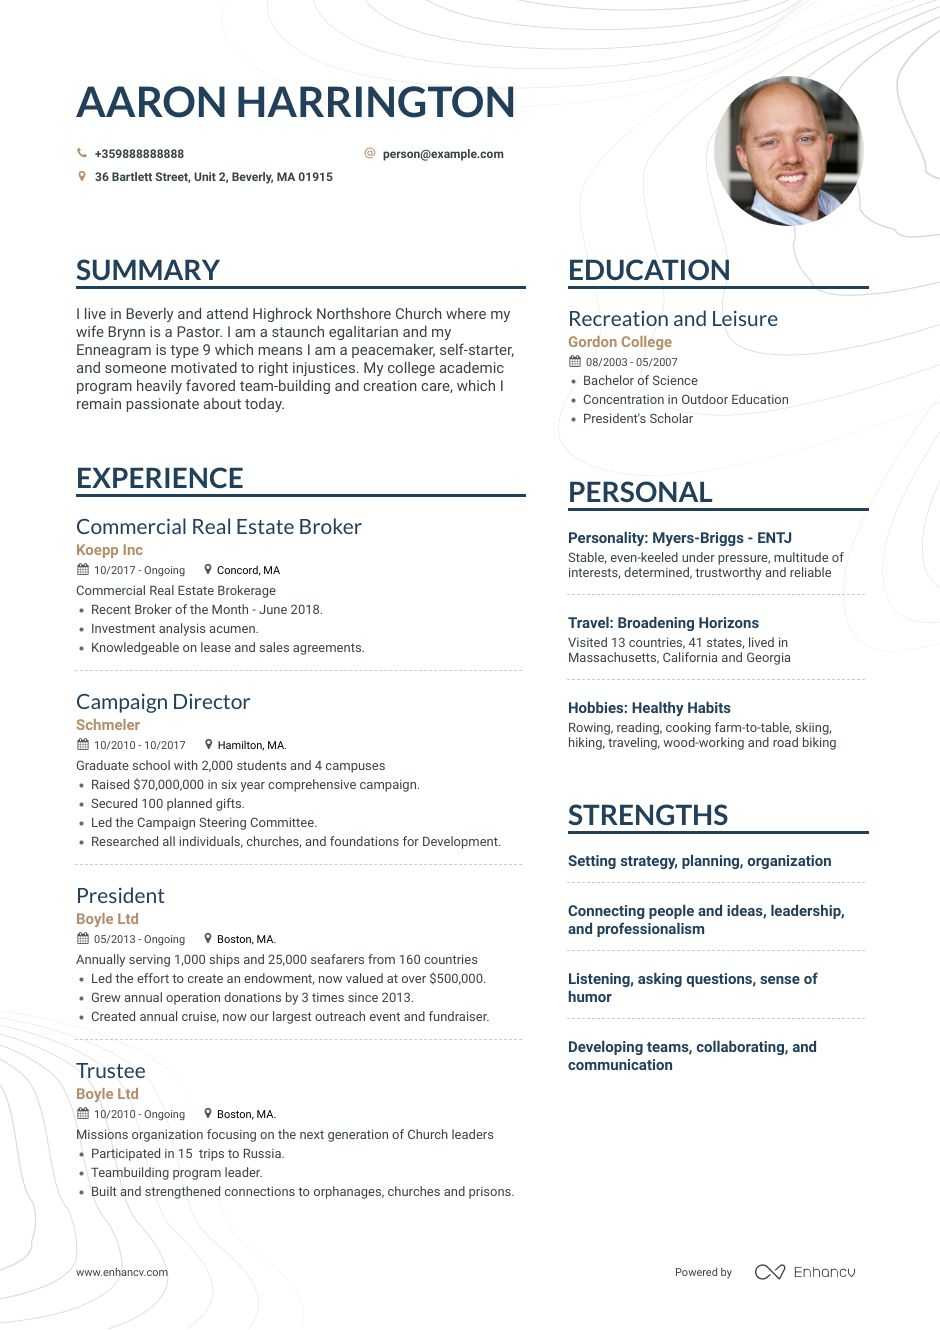 Sample Resume Real Estate Bio Examples Real Estate Resume Examples and Skills You Need to Get Hired